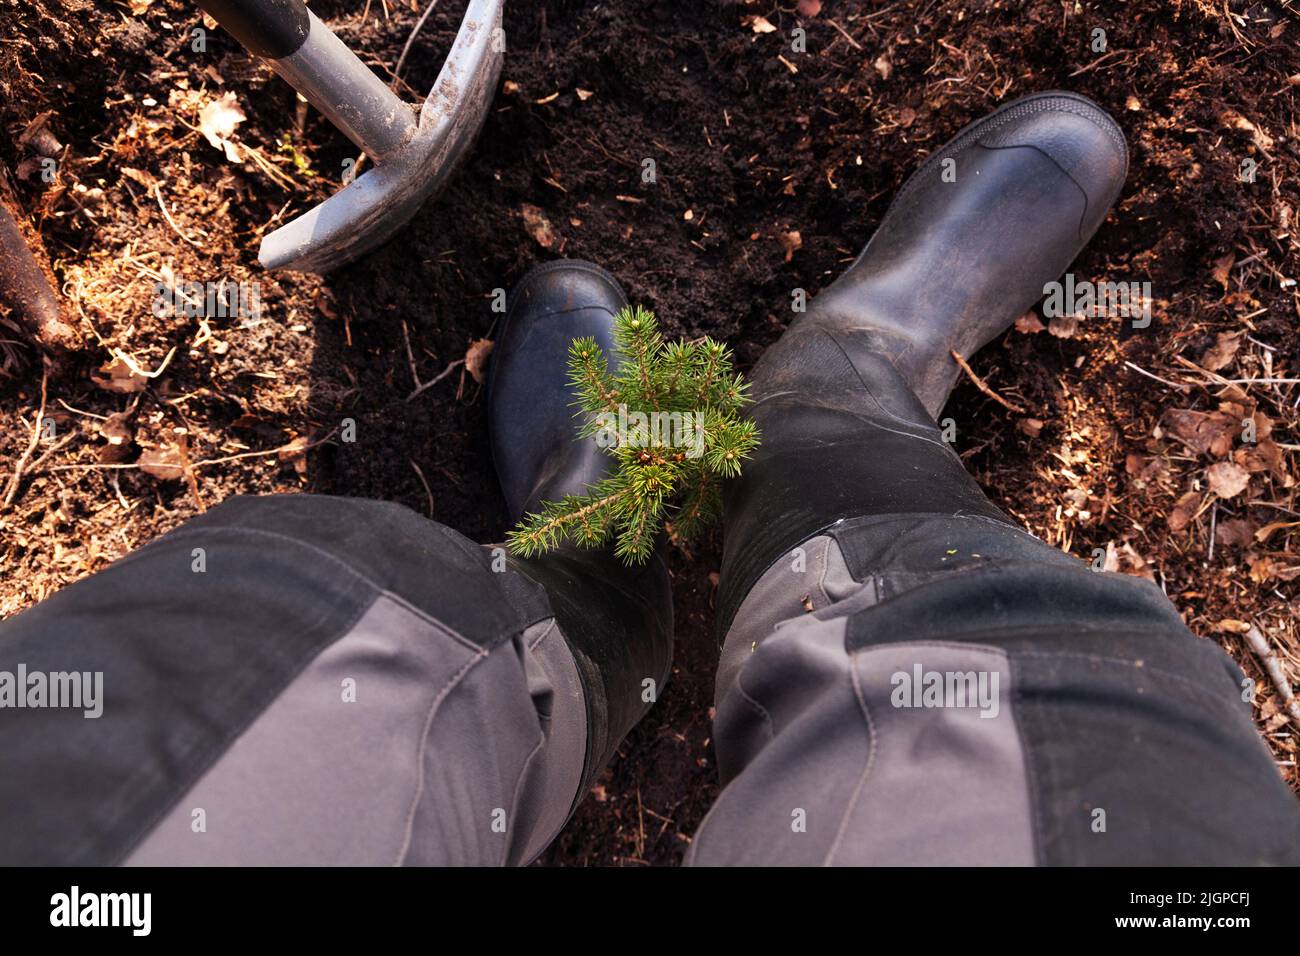 Planting small Spruce saplings on a clear-cut area as a part of reforestation Stock Photo